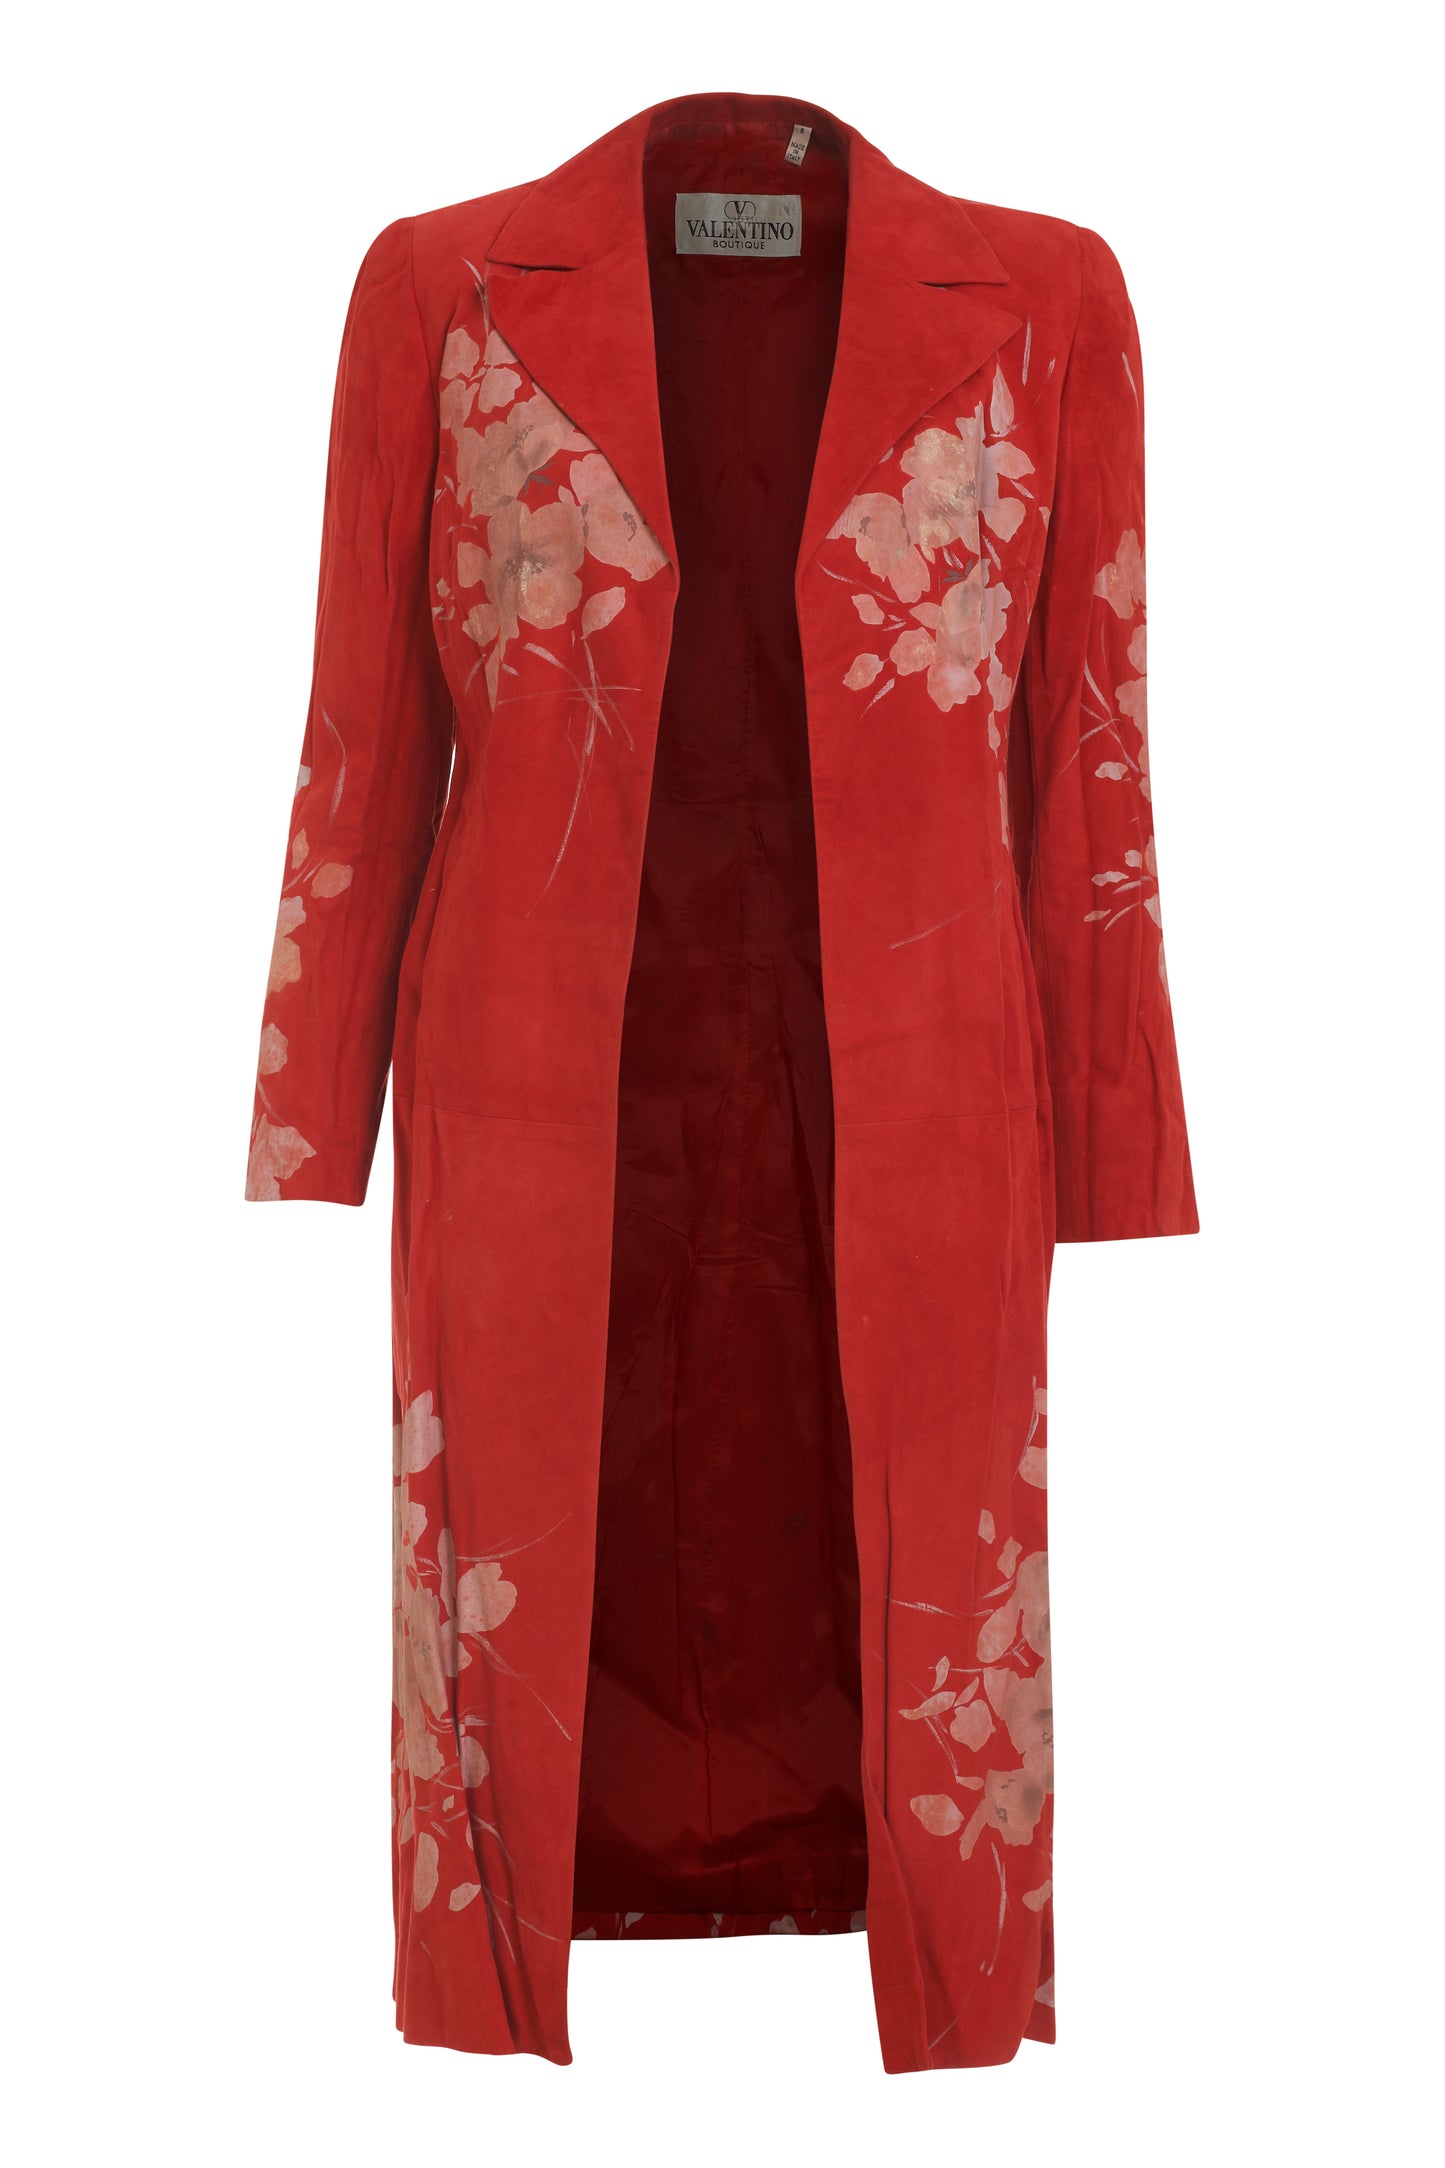 Valentino Boutique red suede coat with floral imprinted detail